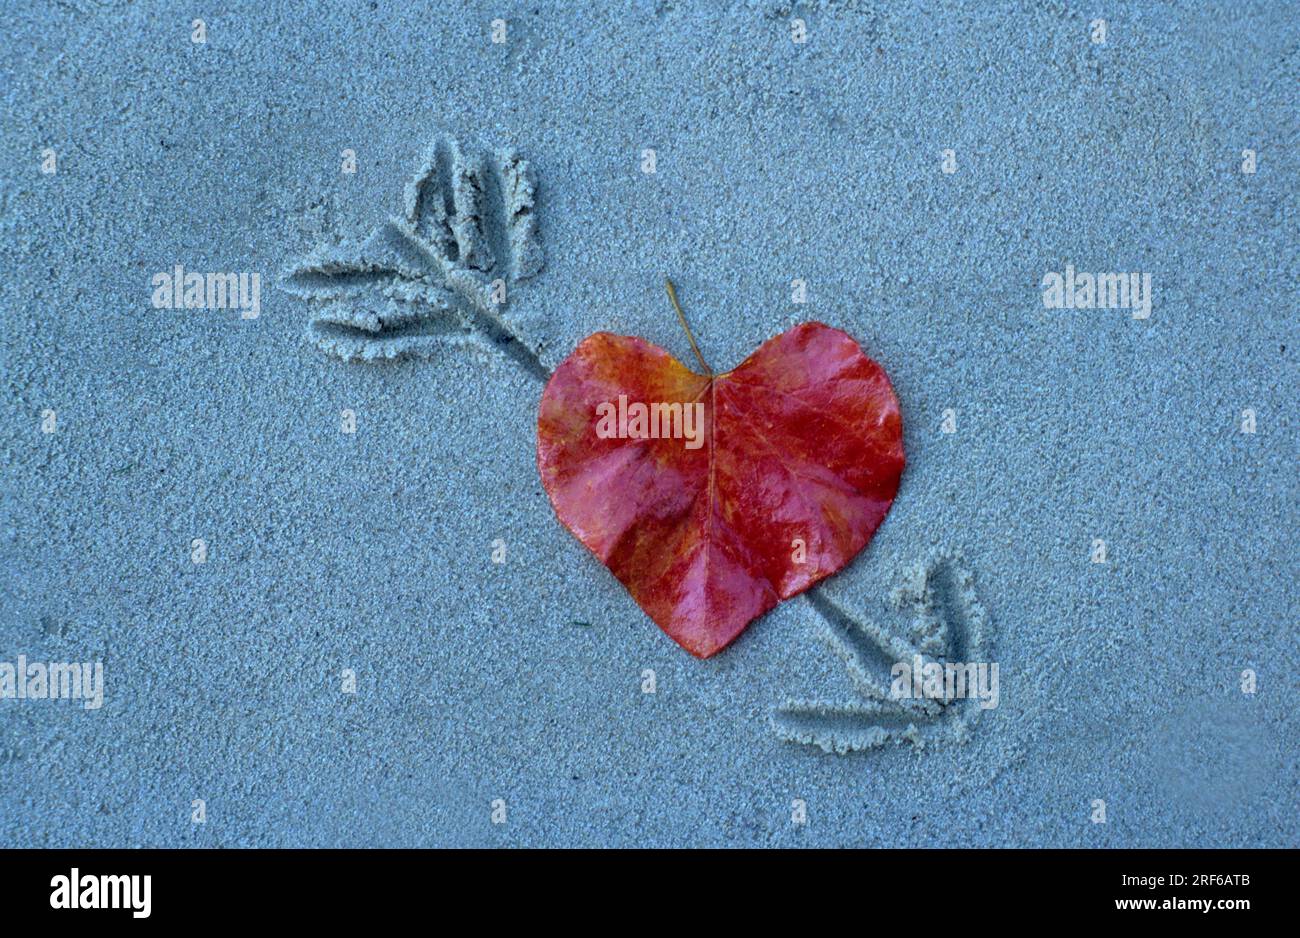 Heart-shaped leaf with arrow, Cupid through heart leaf in sand Stock Photo